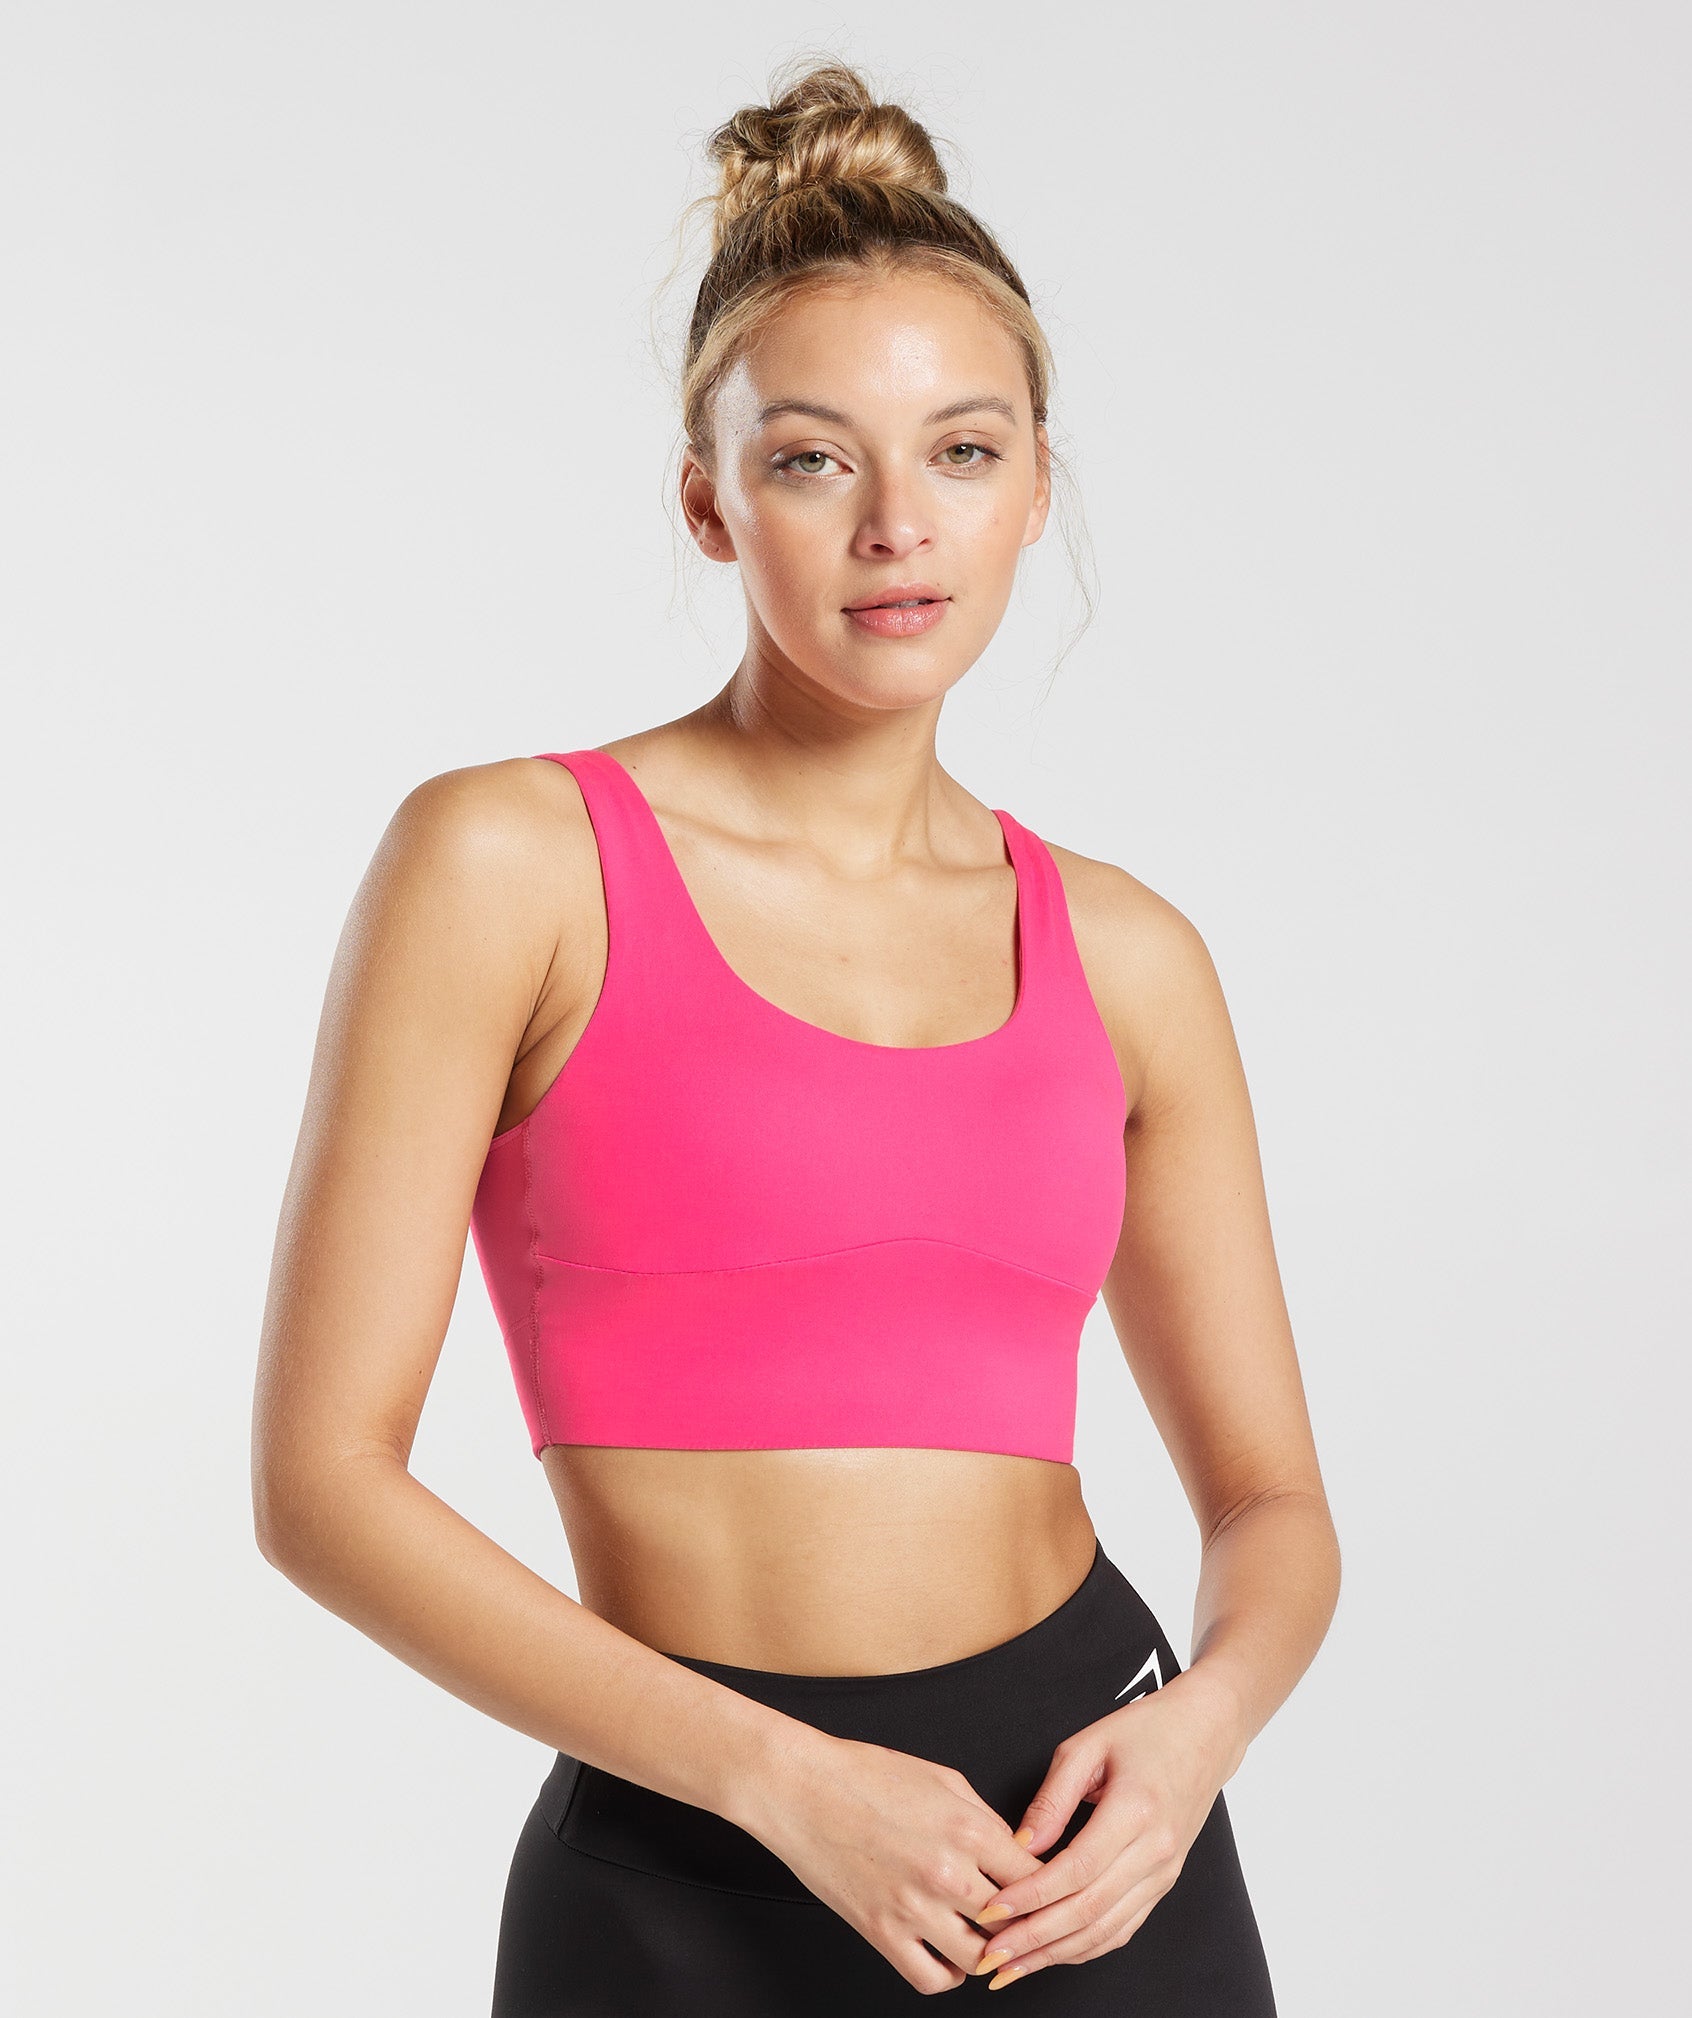 Breathable Quick Dry Yoga Set For Women Cute Cartoon Sports Bra And Pink  Yoga Outfit For Fitness, Running, And Gym Workouts From Chinafashion3,  $34.45